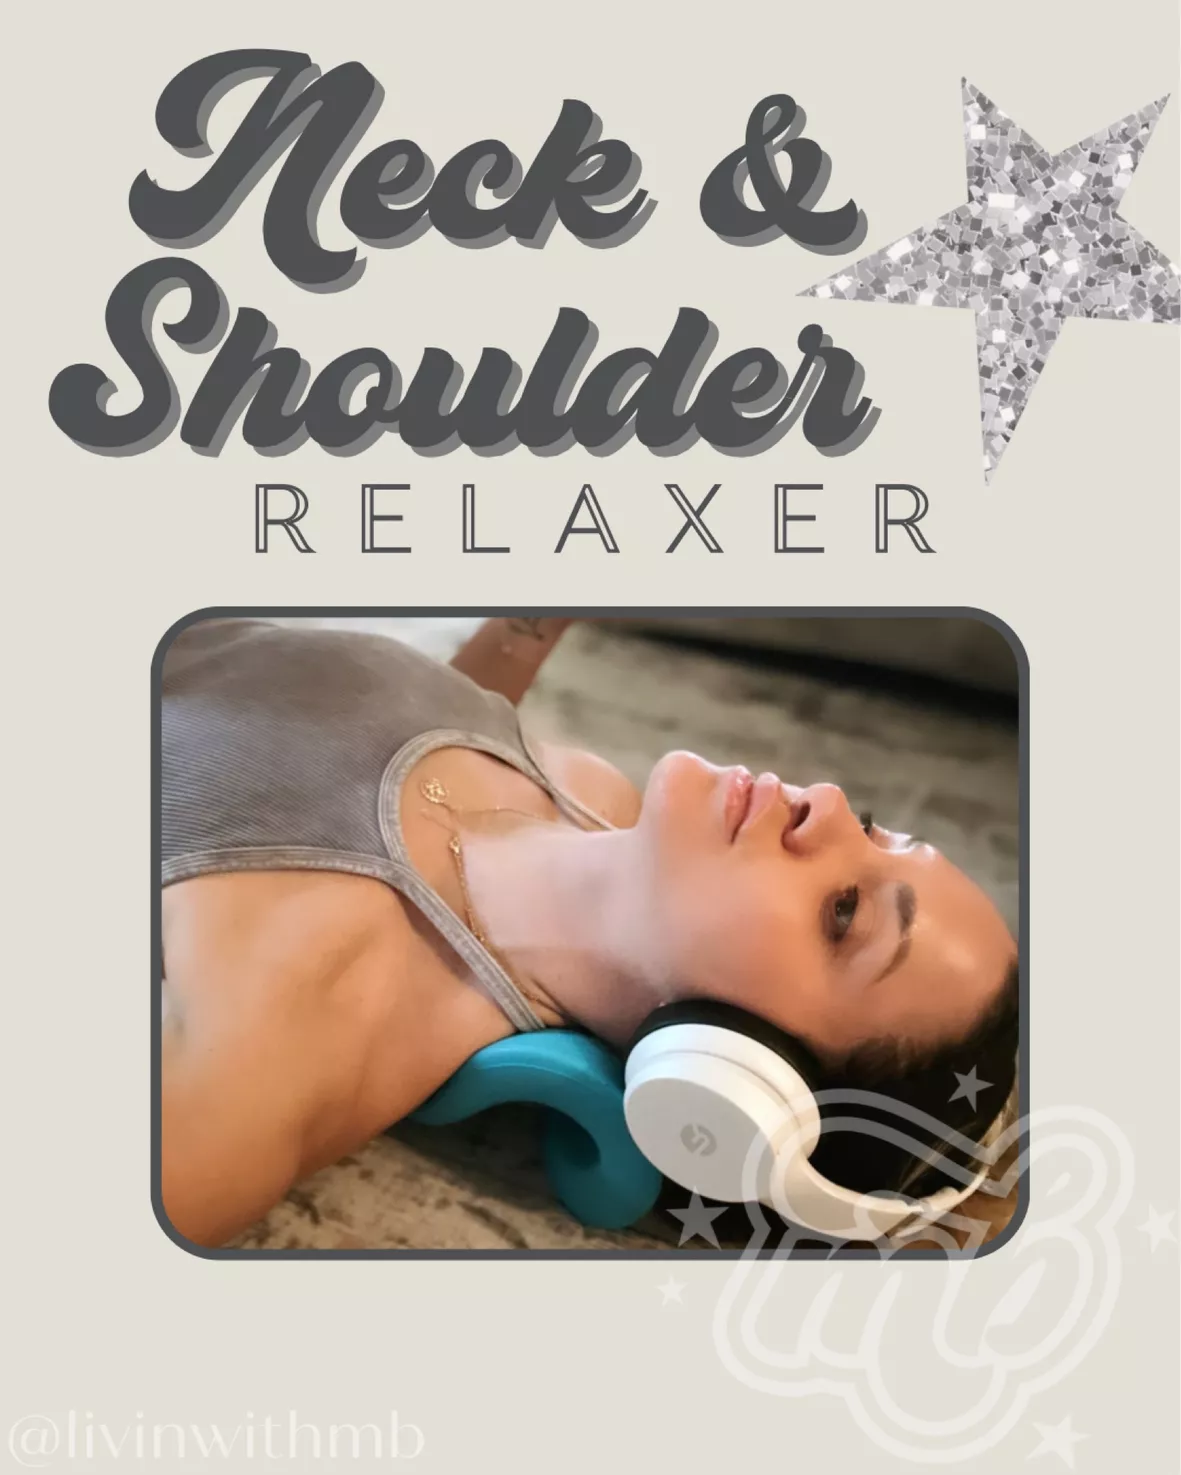 This Popular Neck & Shoulder Relaxer Is on Black Friday Sale